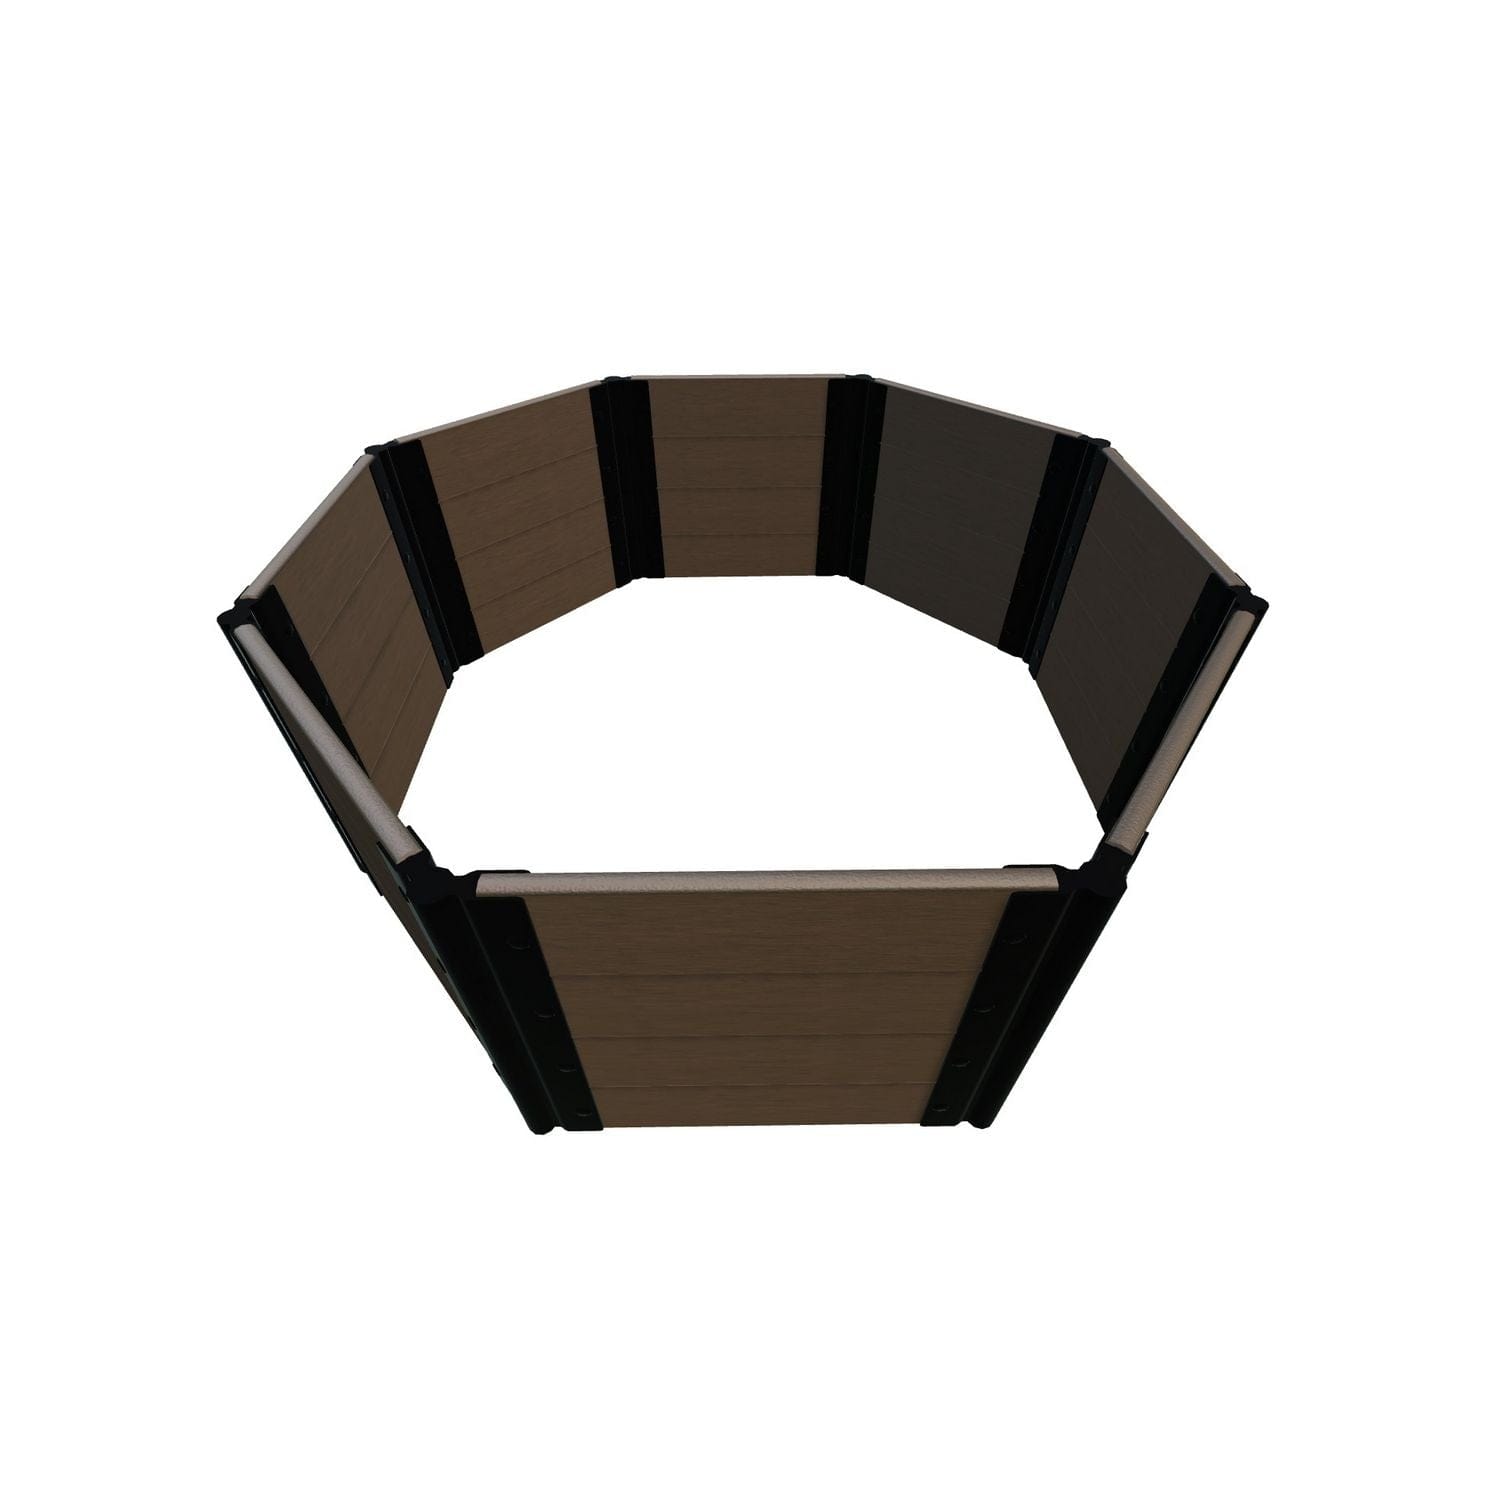 Frame It All Gardening Accessories Frame It All | Tool-Free St. John Baptistry Raised Garden Bed (Octagon) 5' X 5' X 22" - Uptown Brown - 1" Profile 200004461